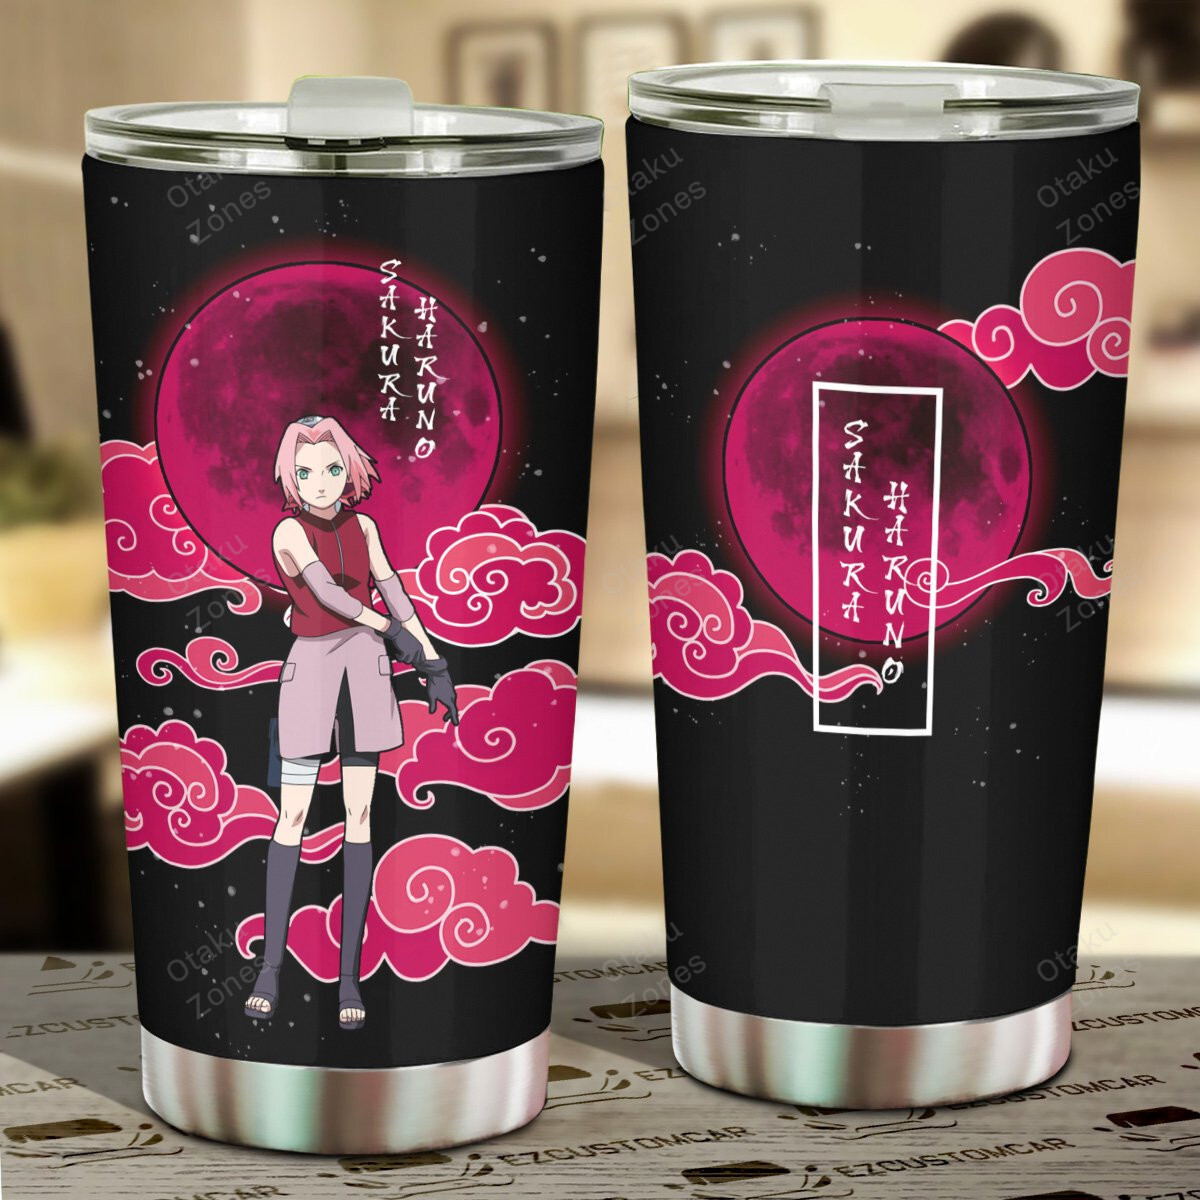 Go ahead and order your new tumbler now! 49